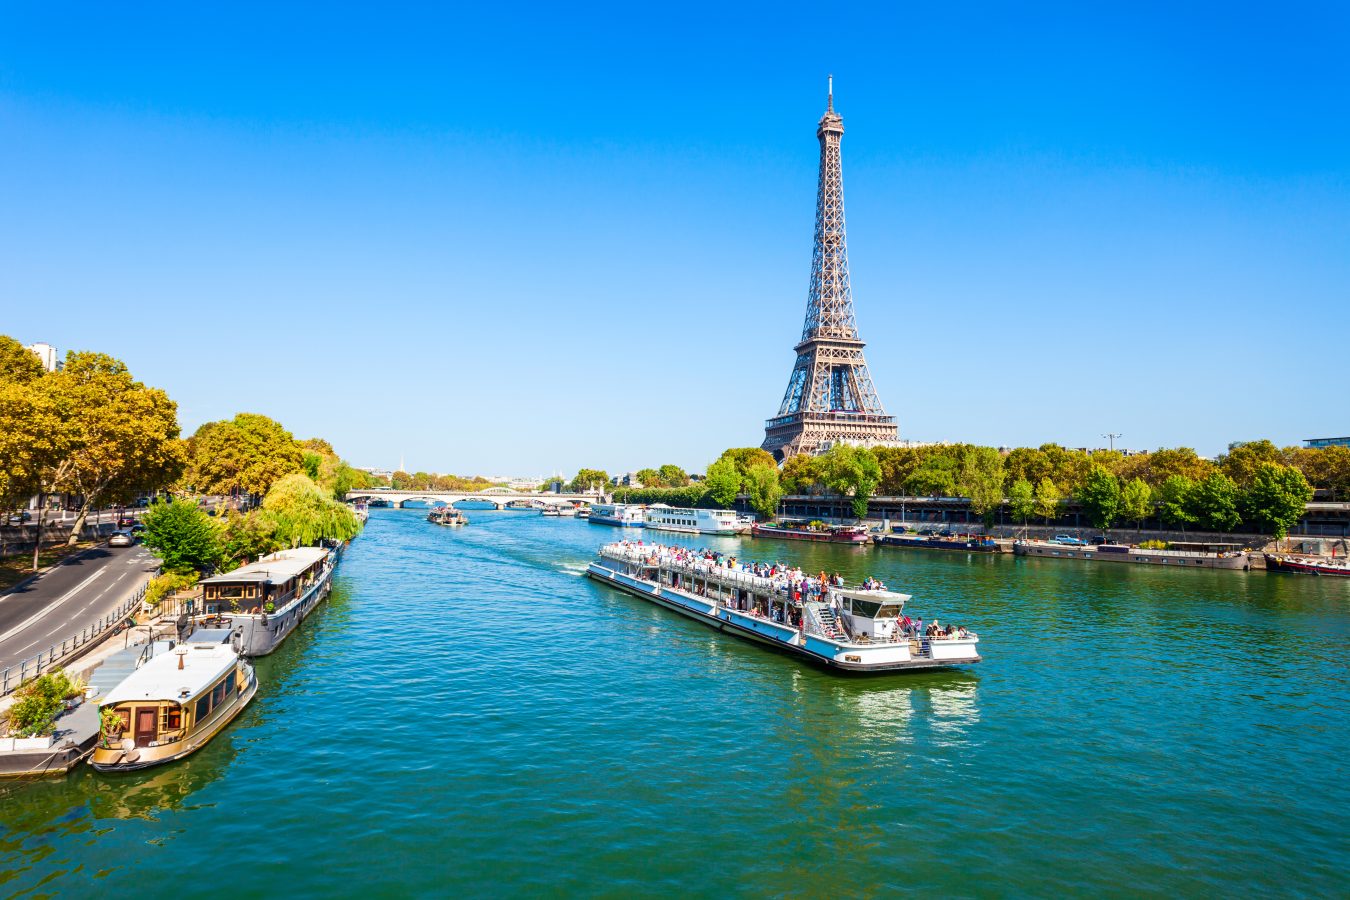 Eiffel Tower in Paris, France with a boat sailing along the Seine River. Paris can be a cheap Europe destination if you plan well.